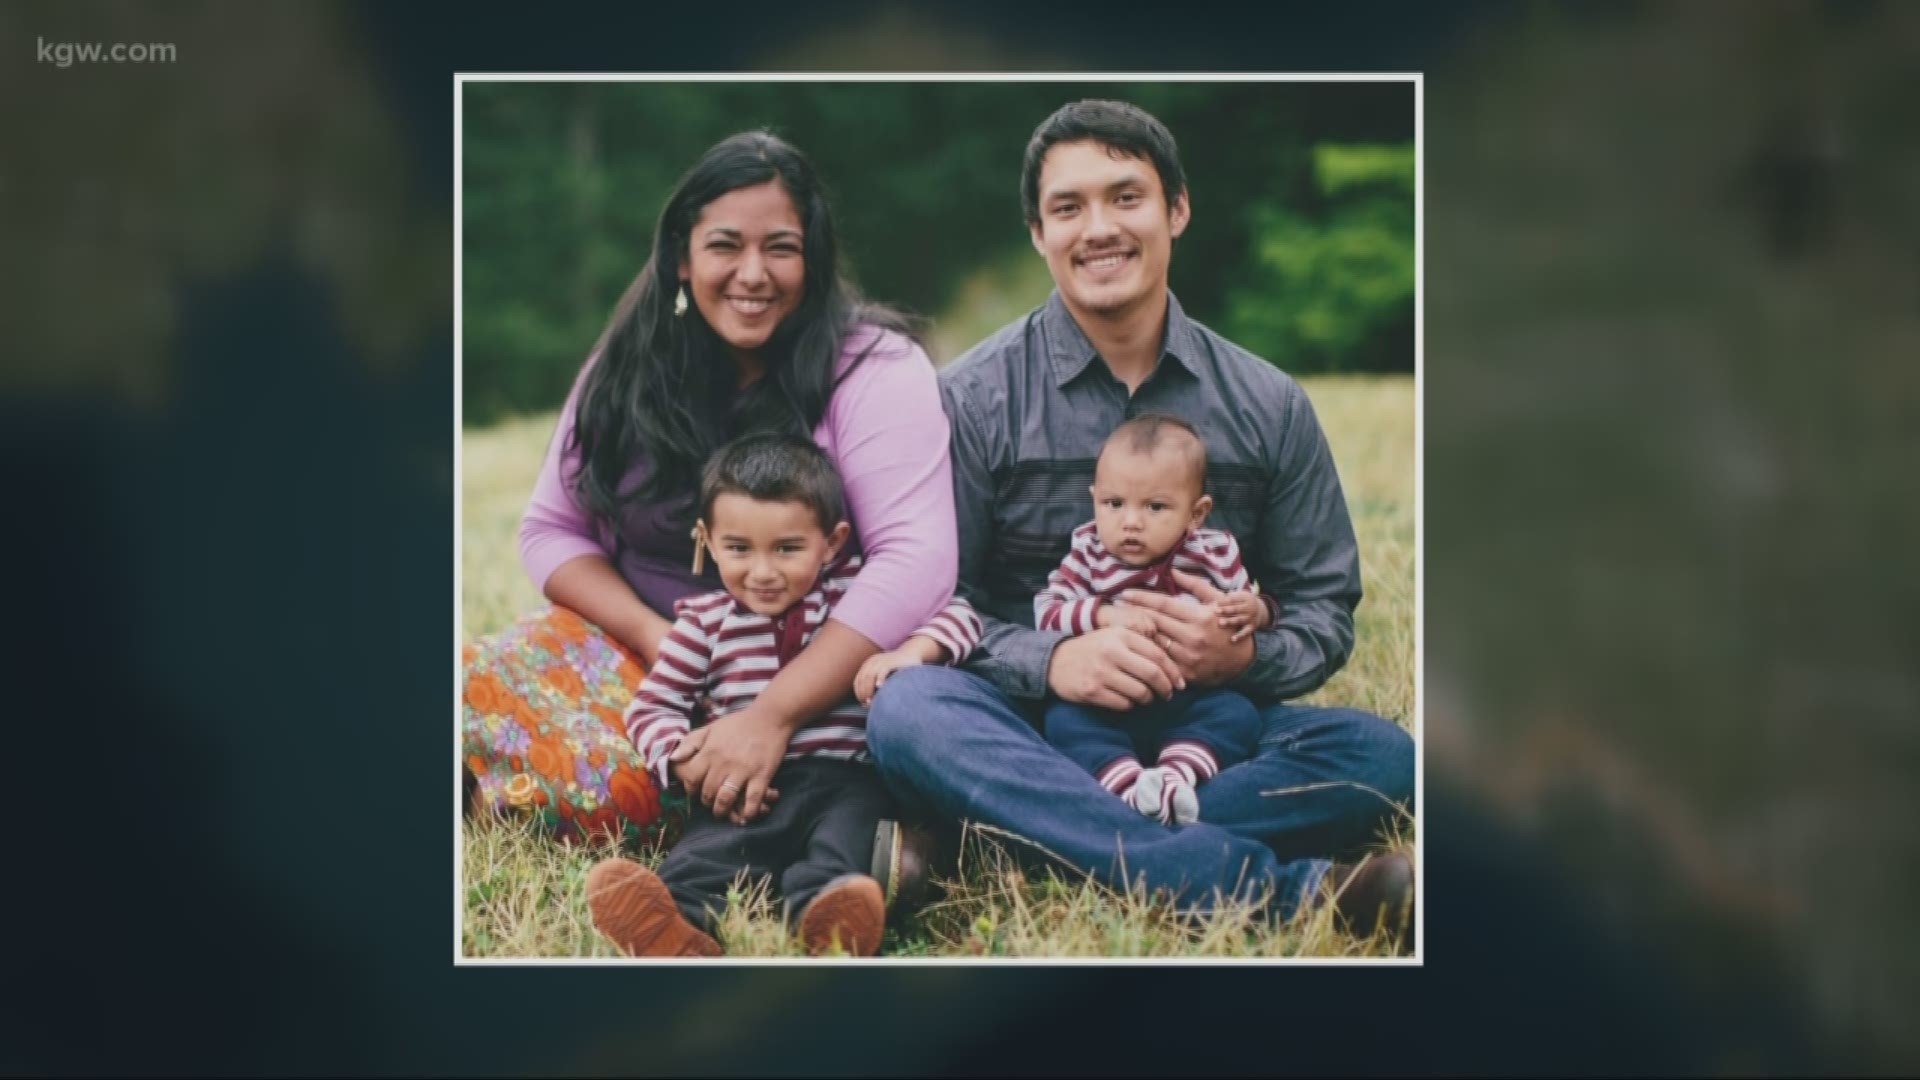 Rebecca Trimble has spent all but three days of her life in Oregon, Washington or Alaska. Now, the wife and mother of two is facing deportation.